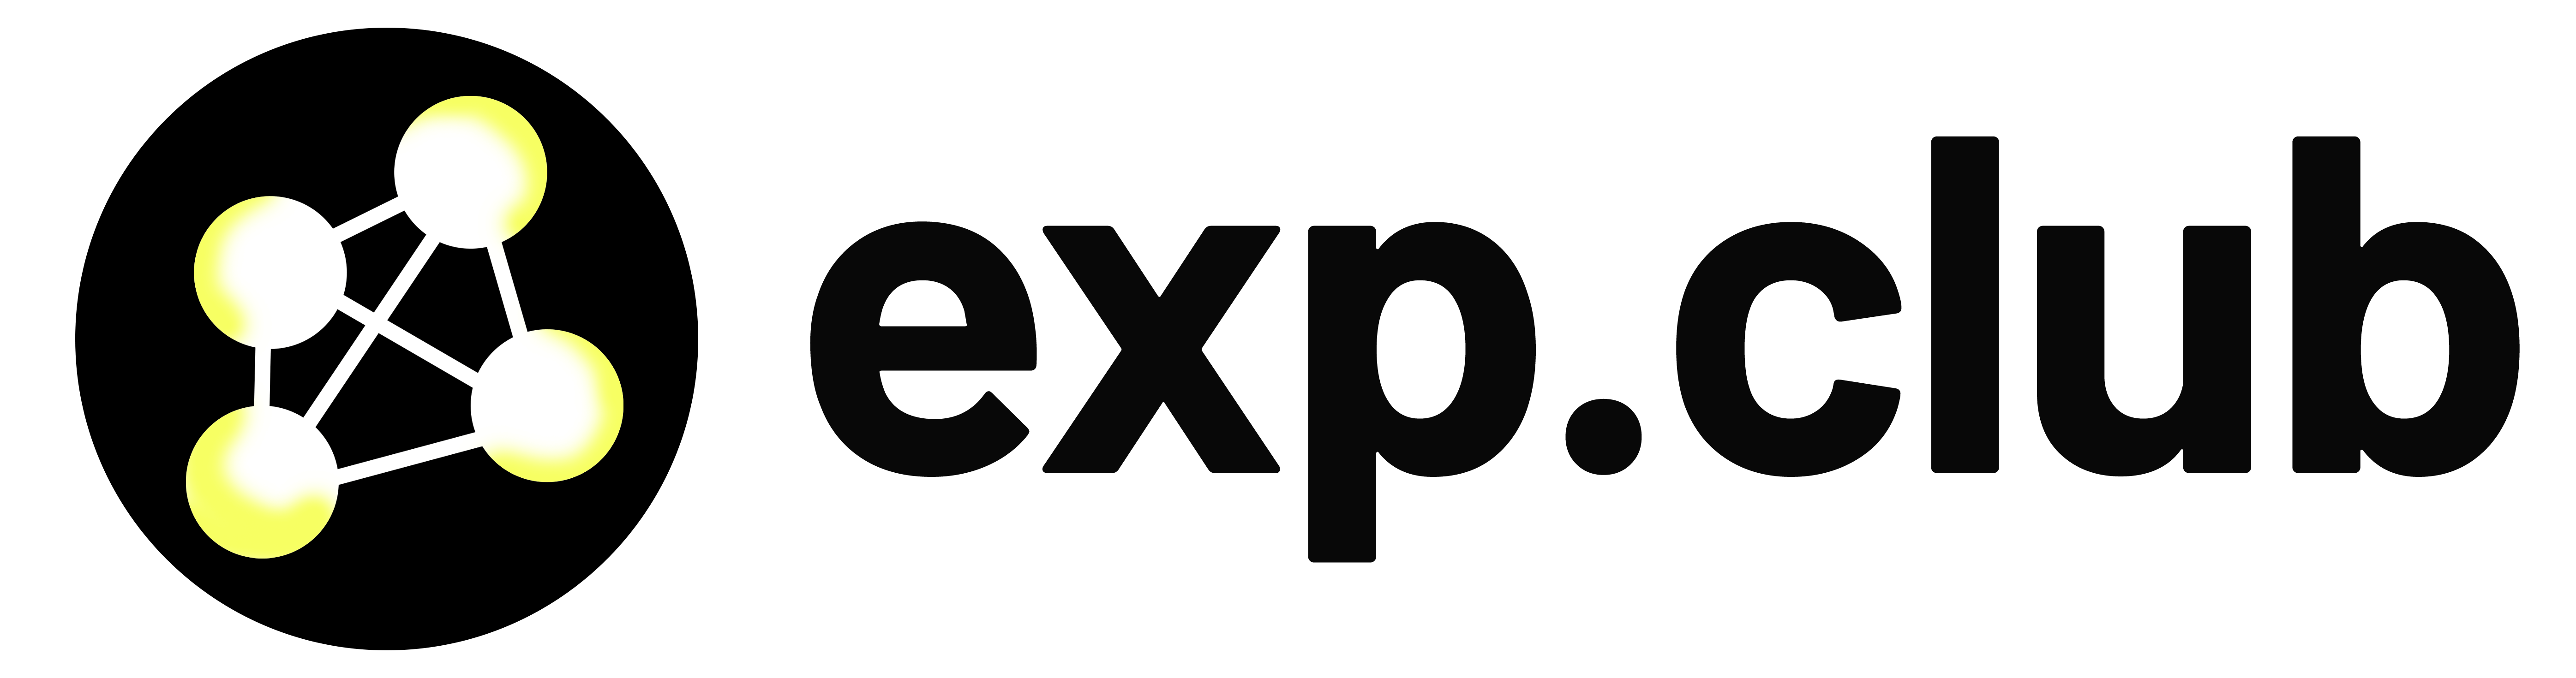 exp.club - gain experience by building real products